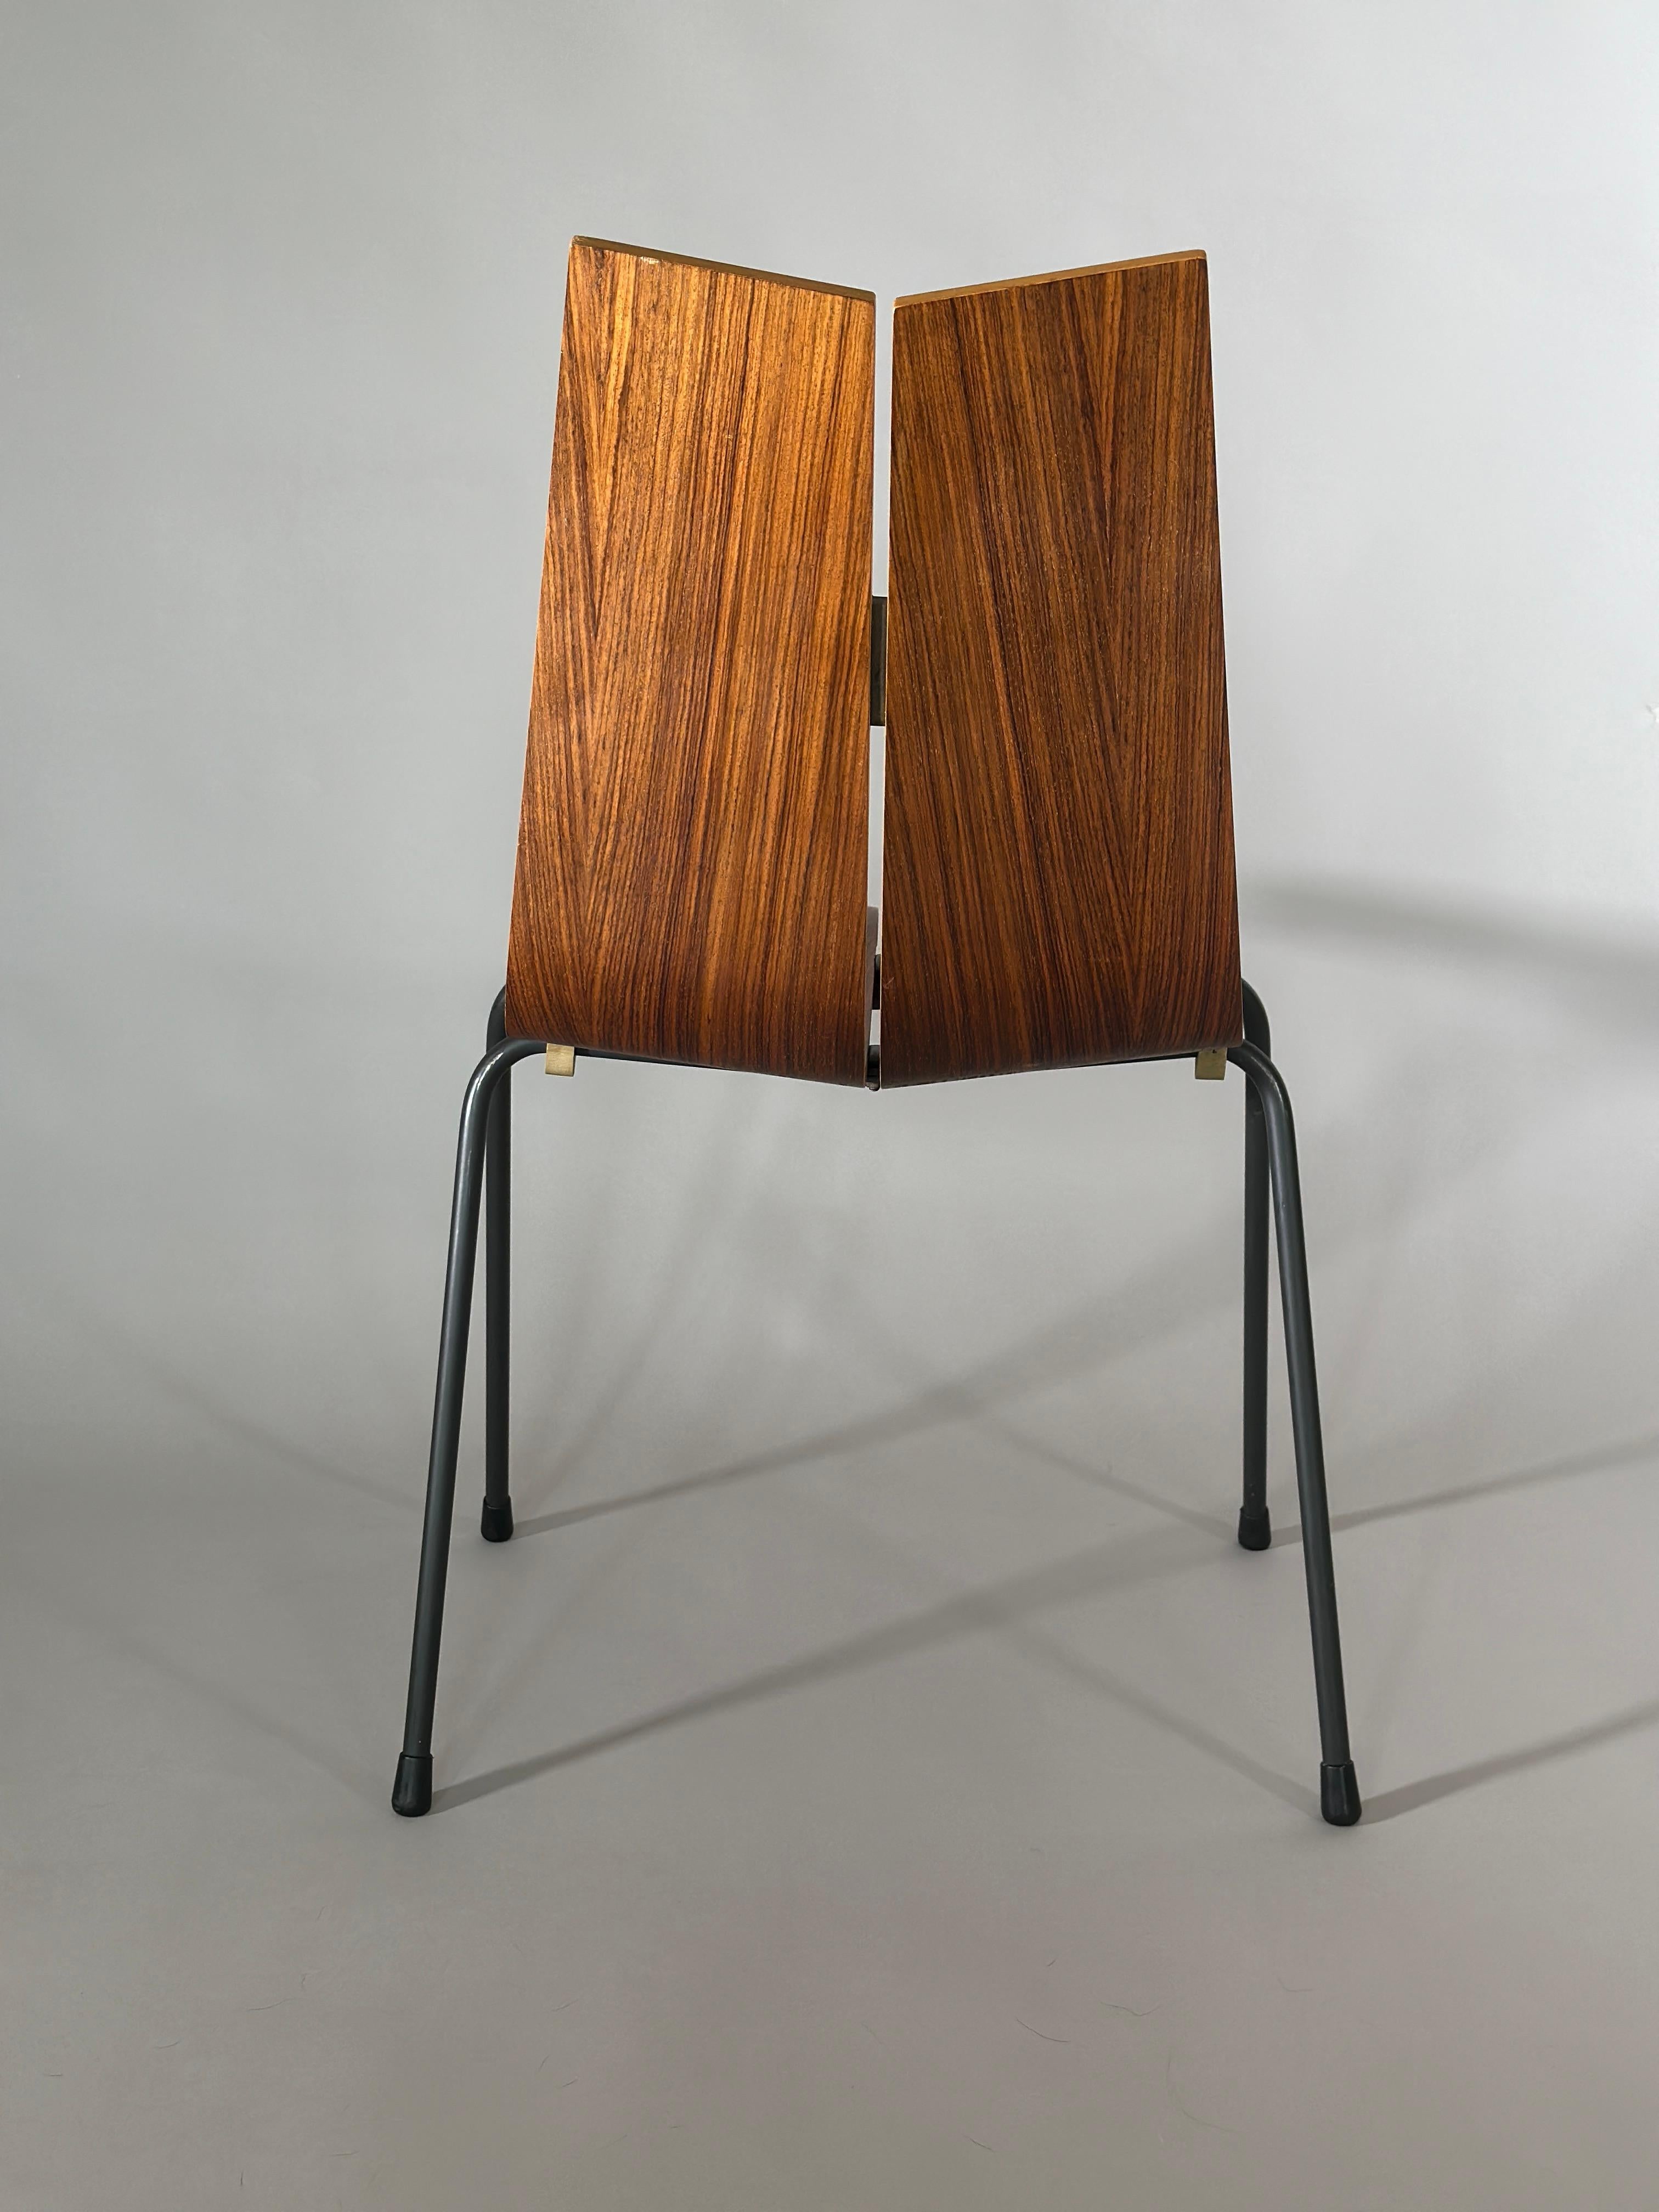 Swiss Ga Chair by Hans Bellmann for Horgenglarus, 1950s For Sale